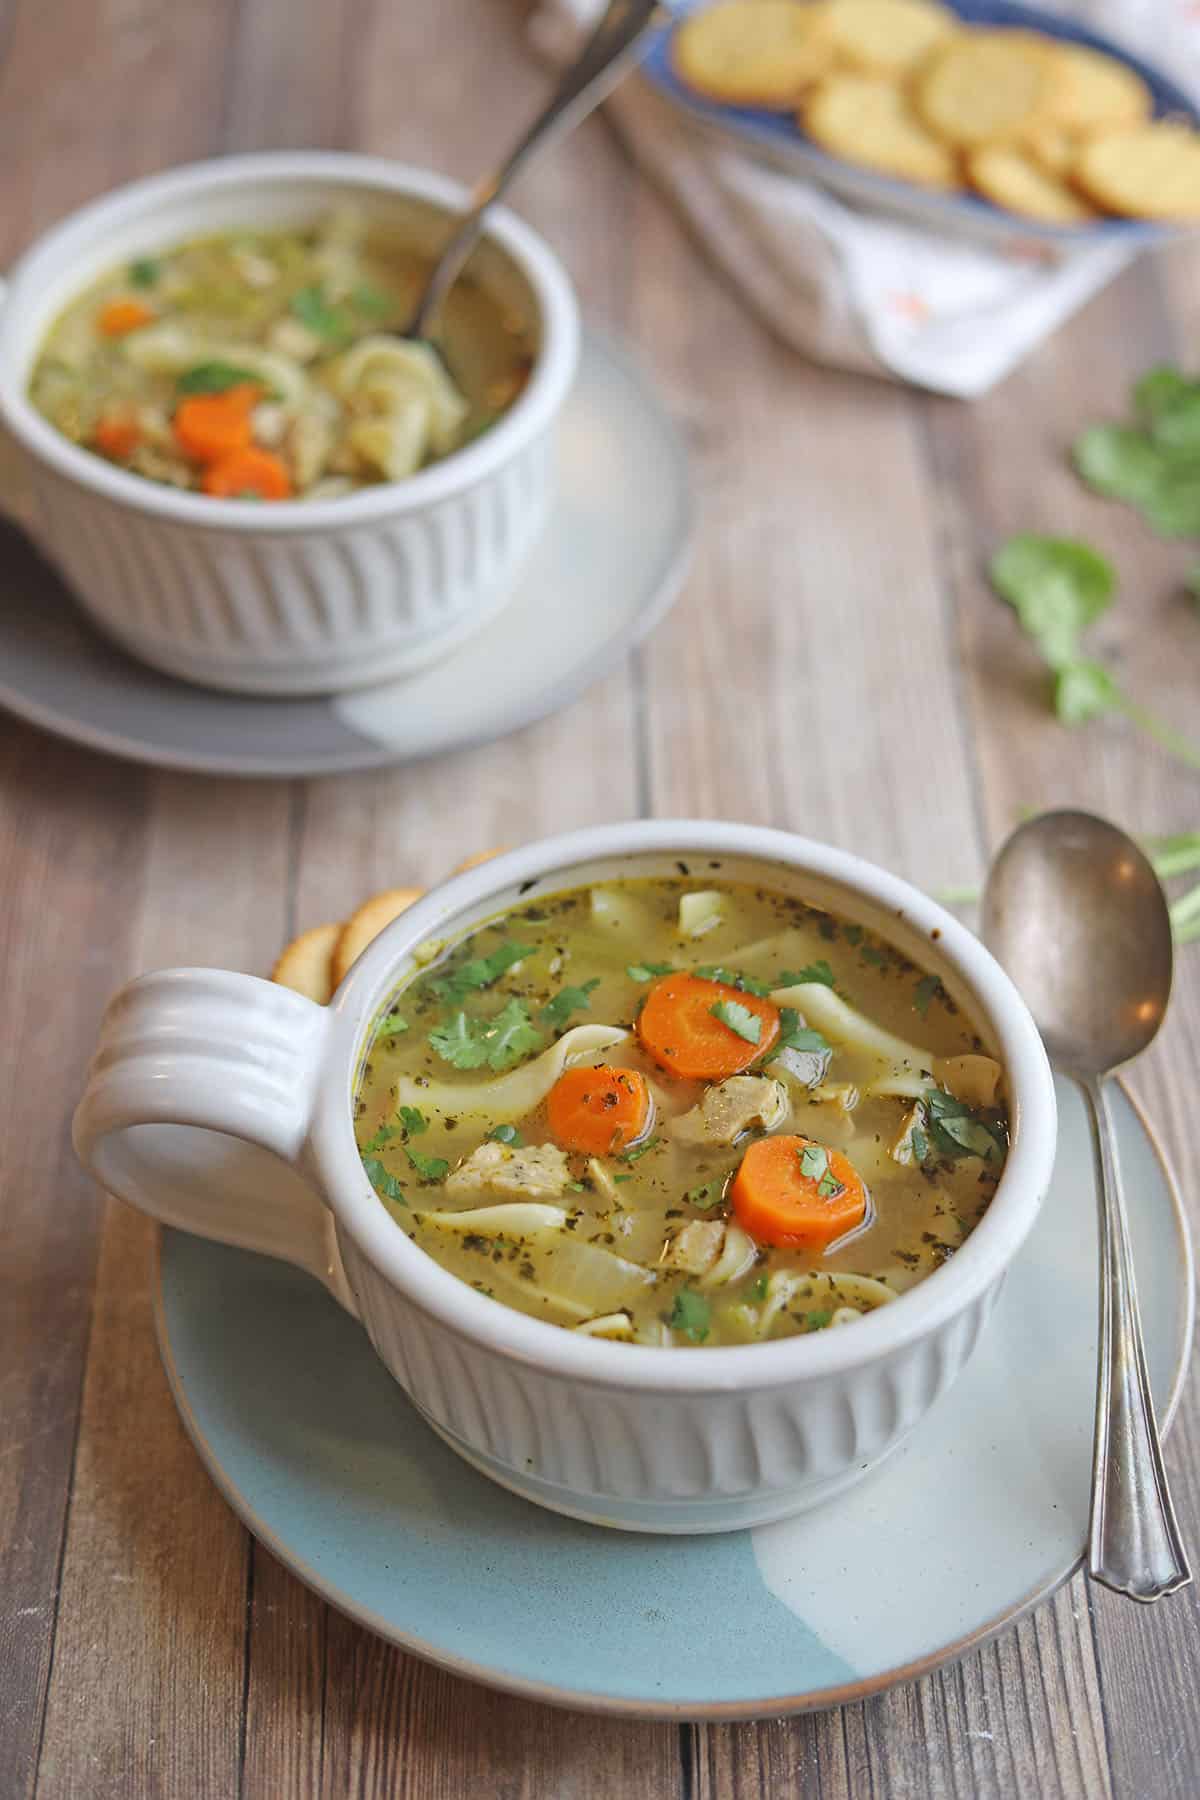 Vegetarian chicken noodle soup in bowls by crackers.